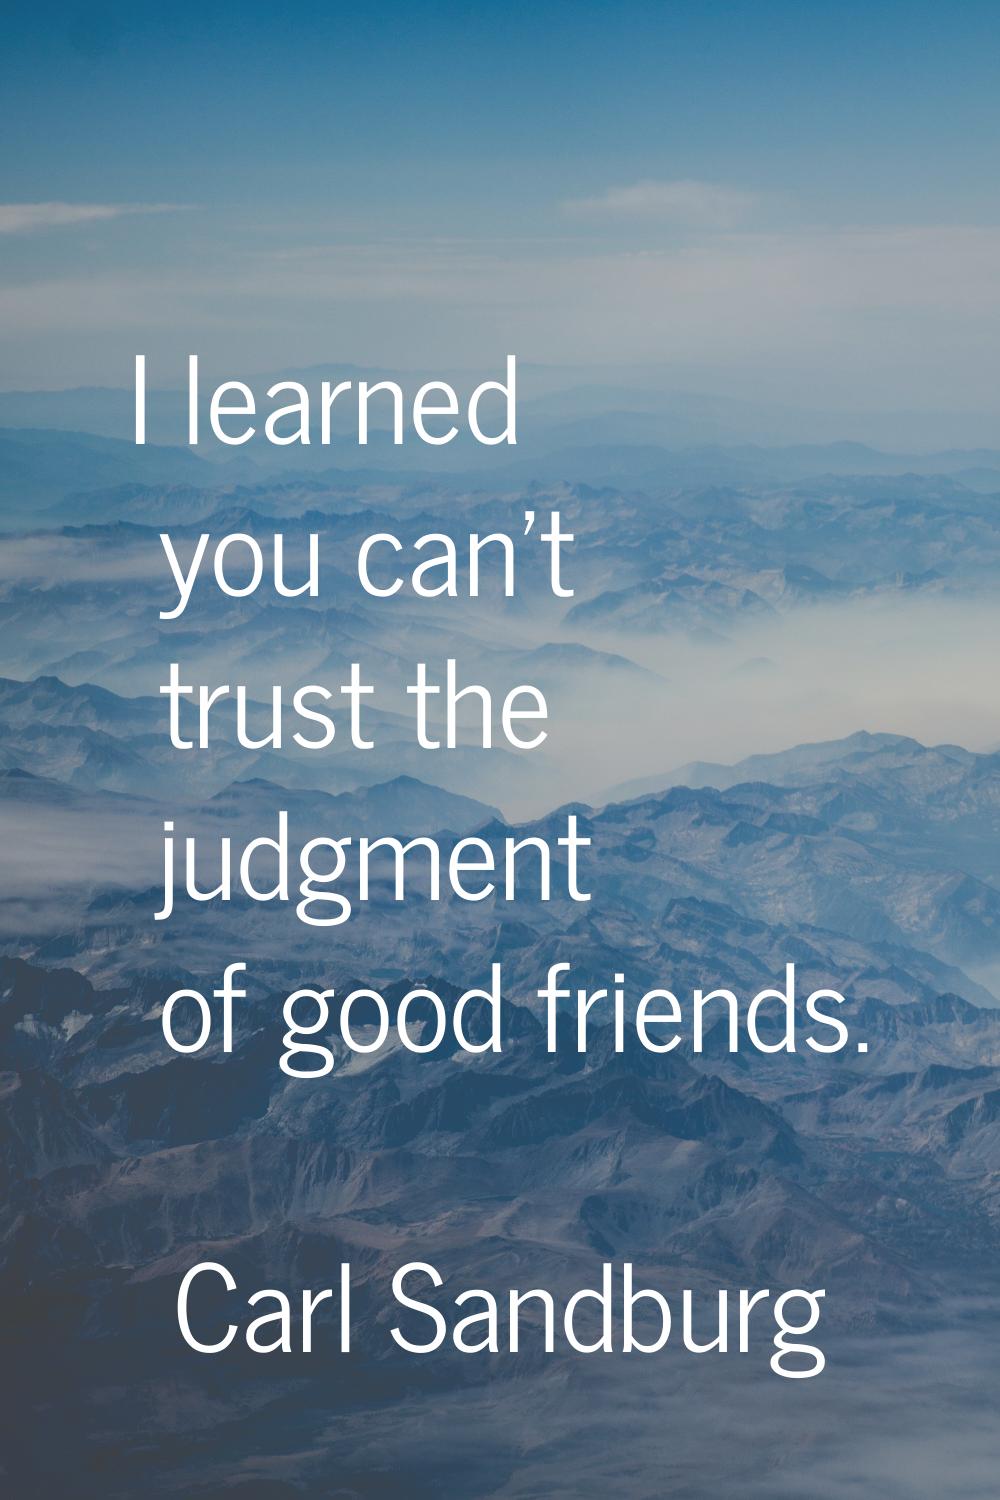 I learned you can't trust the judgment of good friends.